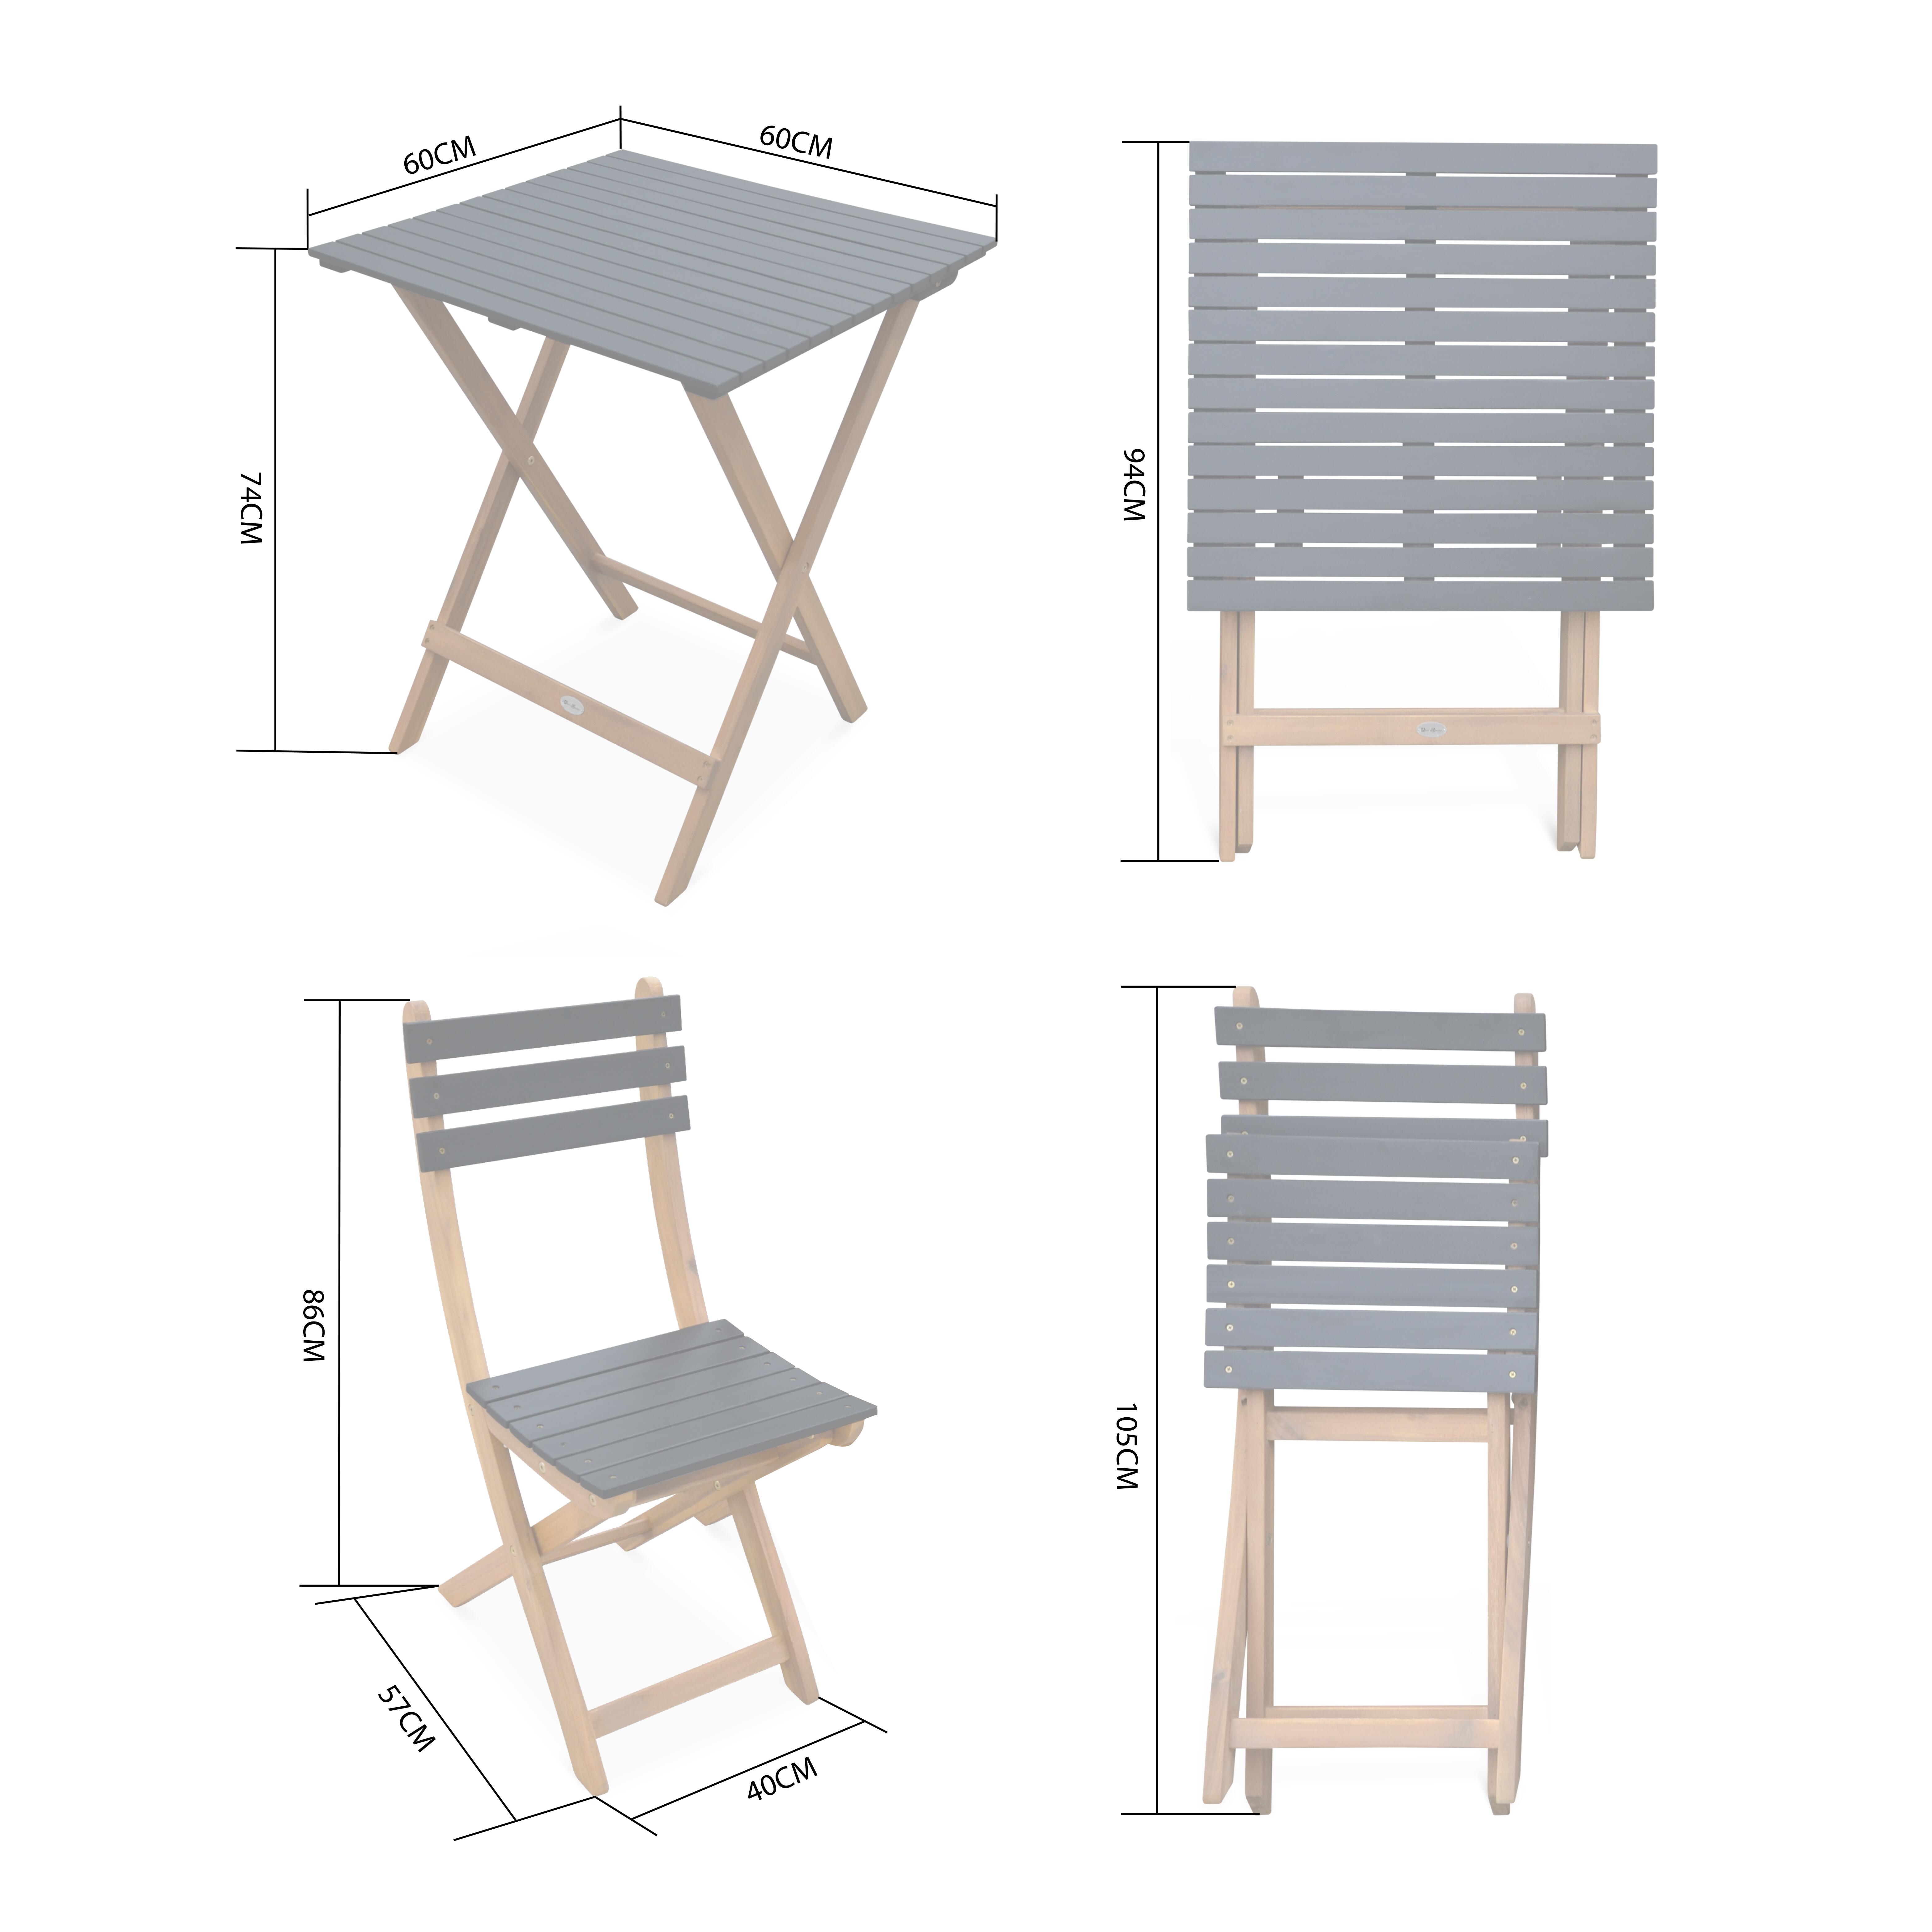 FIGUERES 2 Seater Wood Bistro Garden Set Foldable